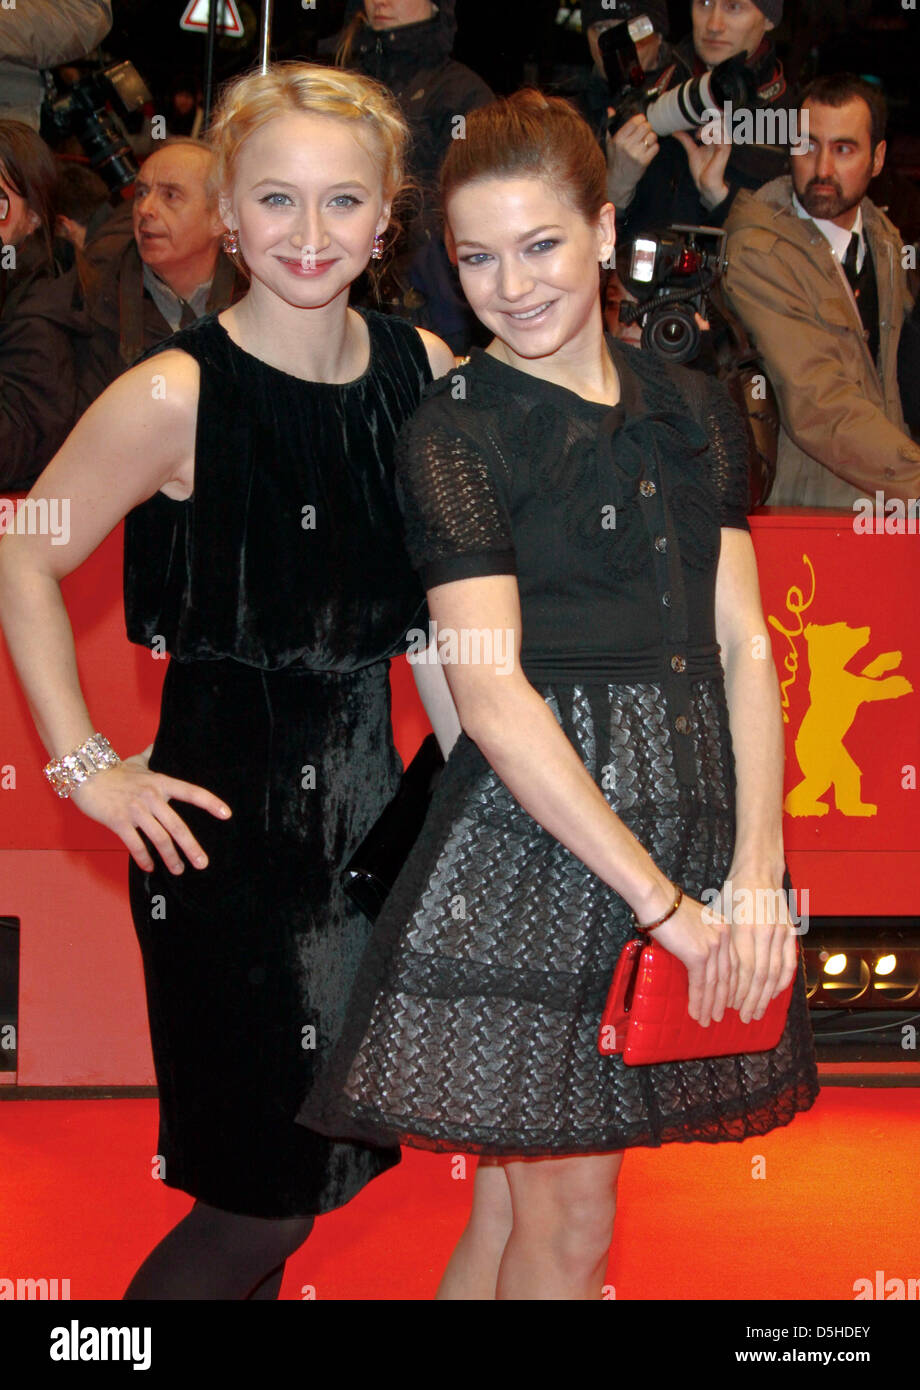 German actresses Anna Maria Muehe (L) and Hannah Herzsprung (R) arrive at the opening of the 60th Berlinale international film festival at Berlinale Palast in Berlin, Germany, 11 February 2010. Photo: Hubert Boesl Stock Photo